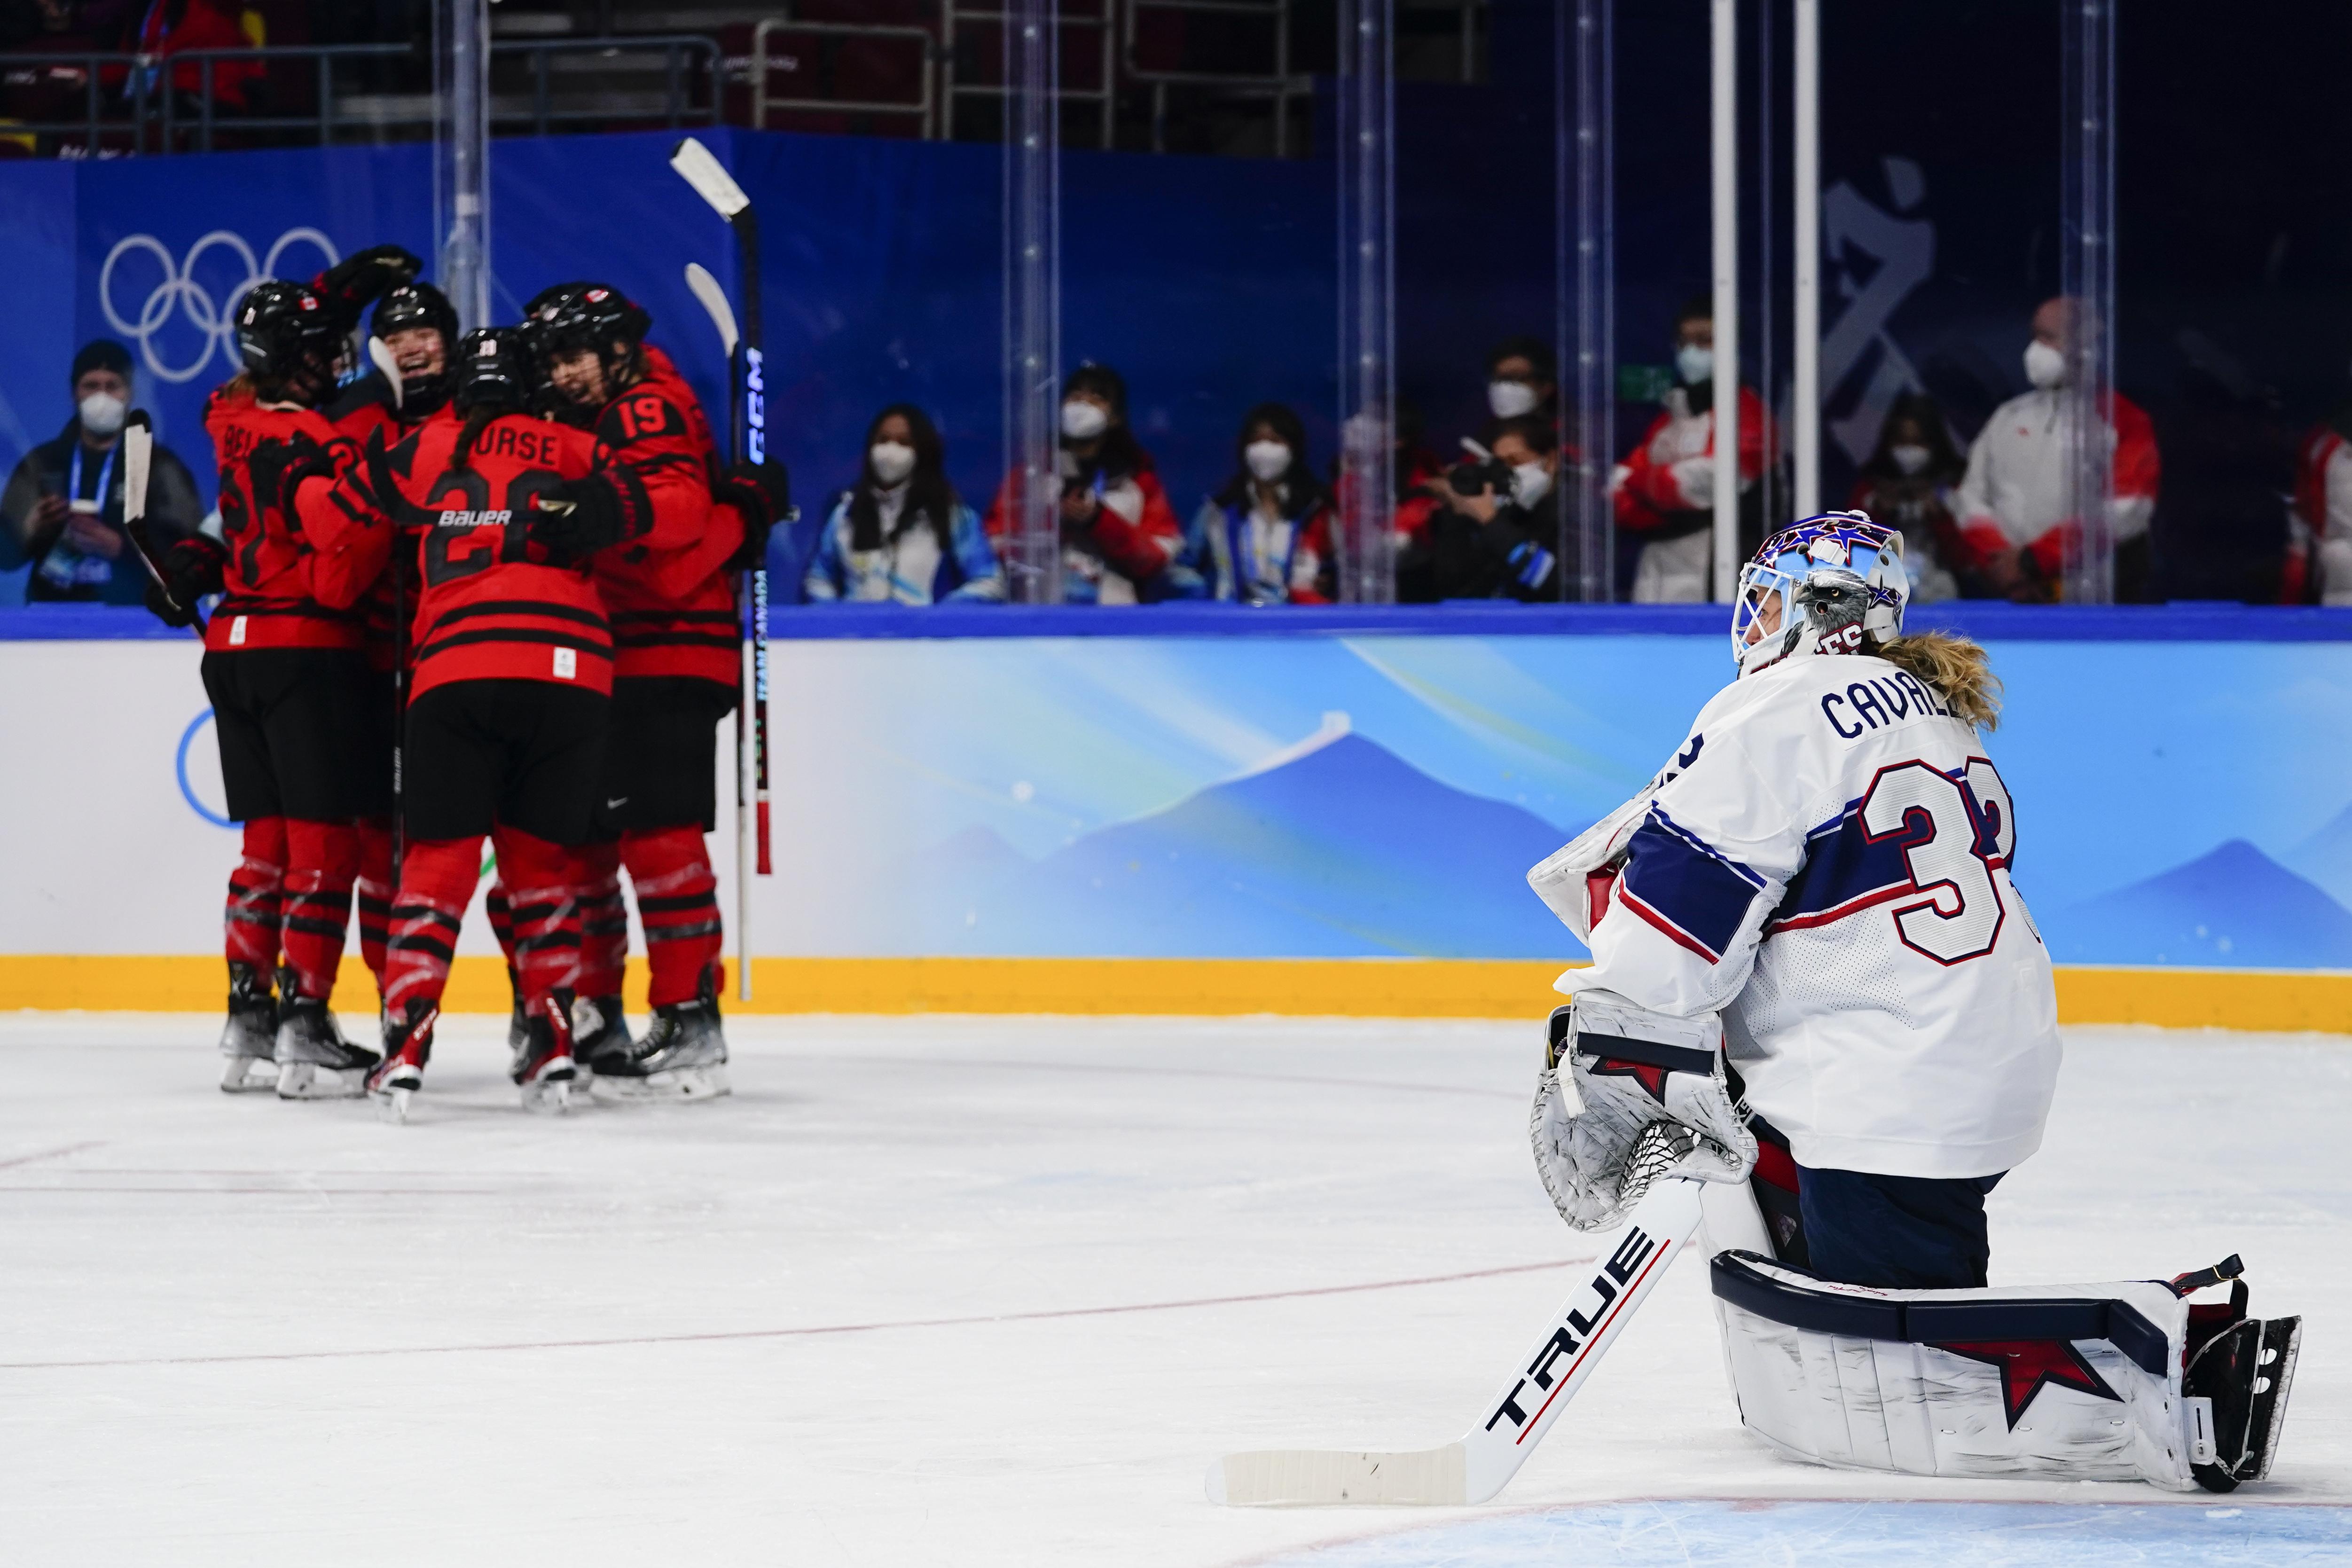 Marie-Philip Poulin leads Canada women to Olympic gold in 3-2 win over U.S